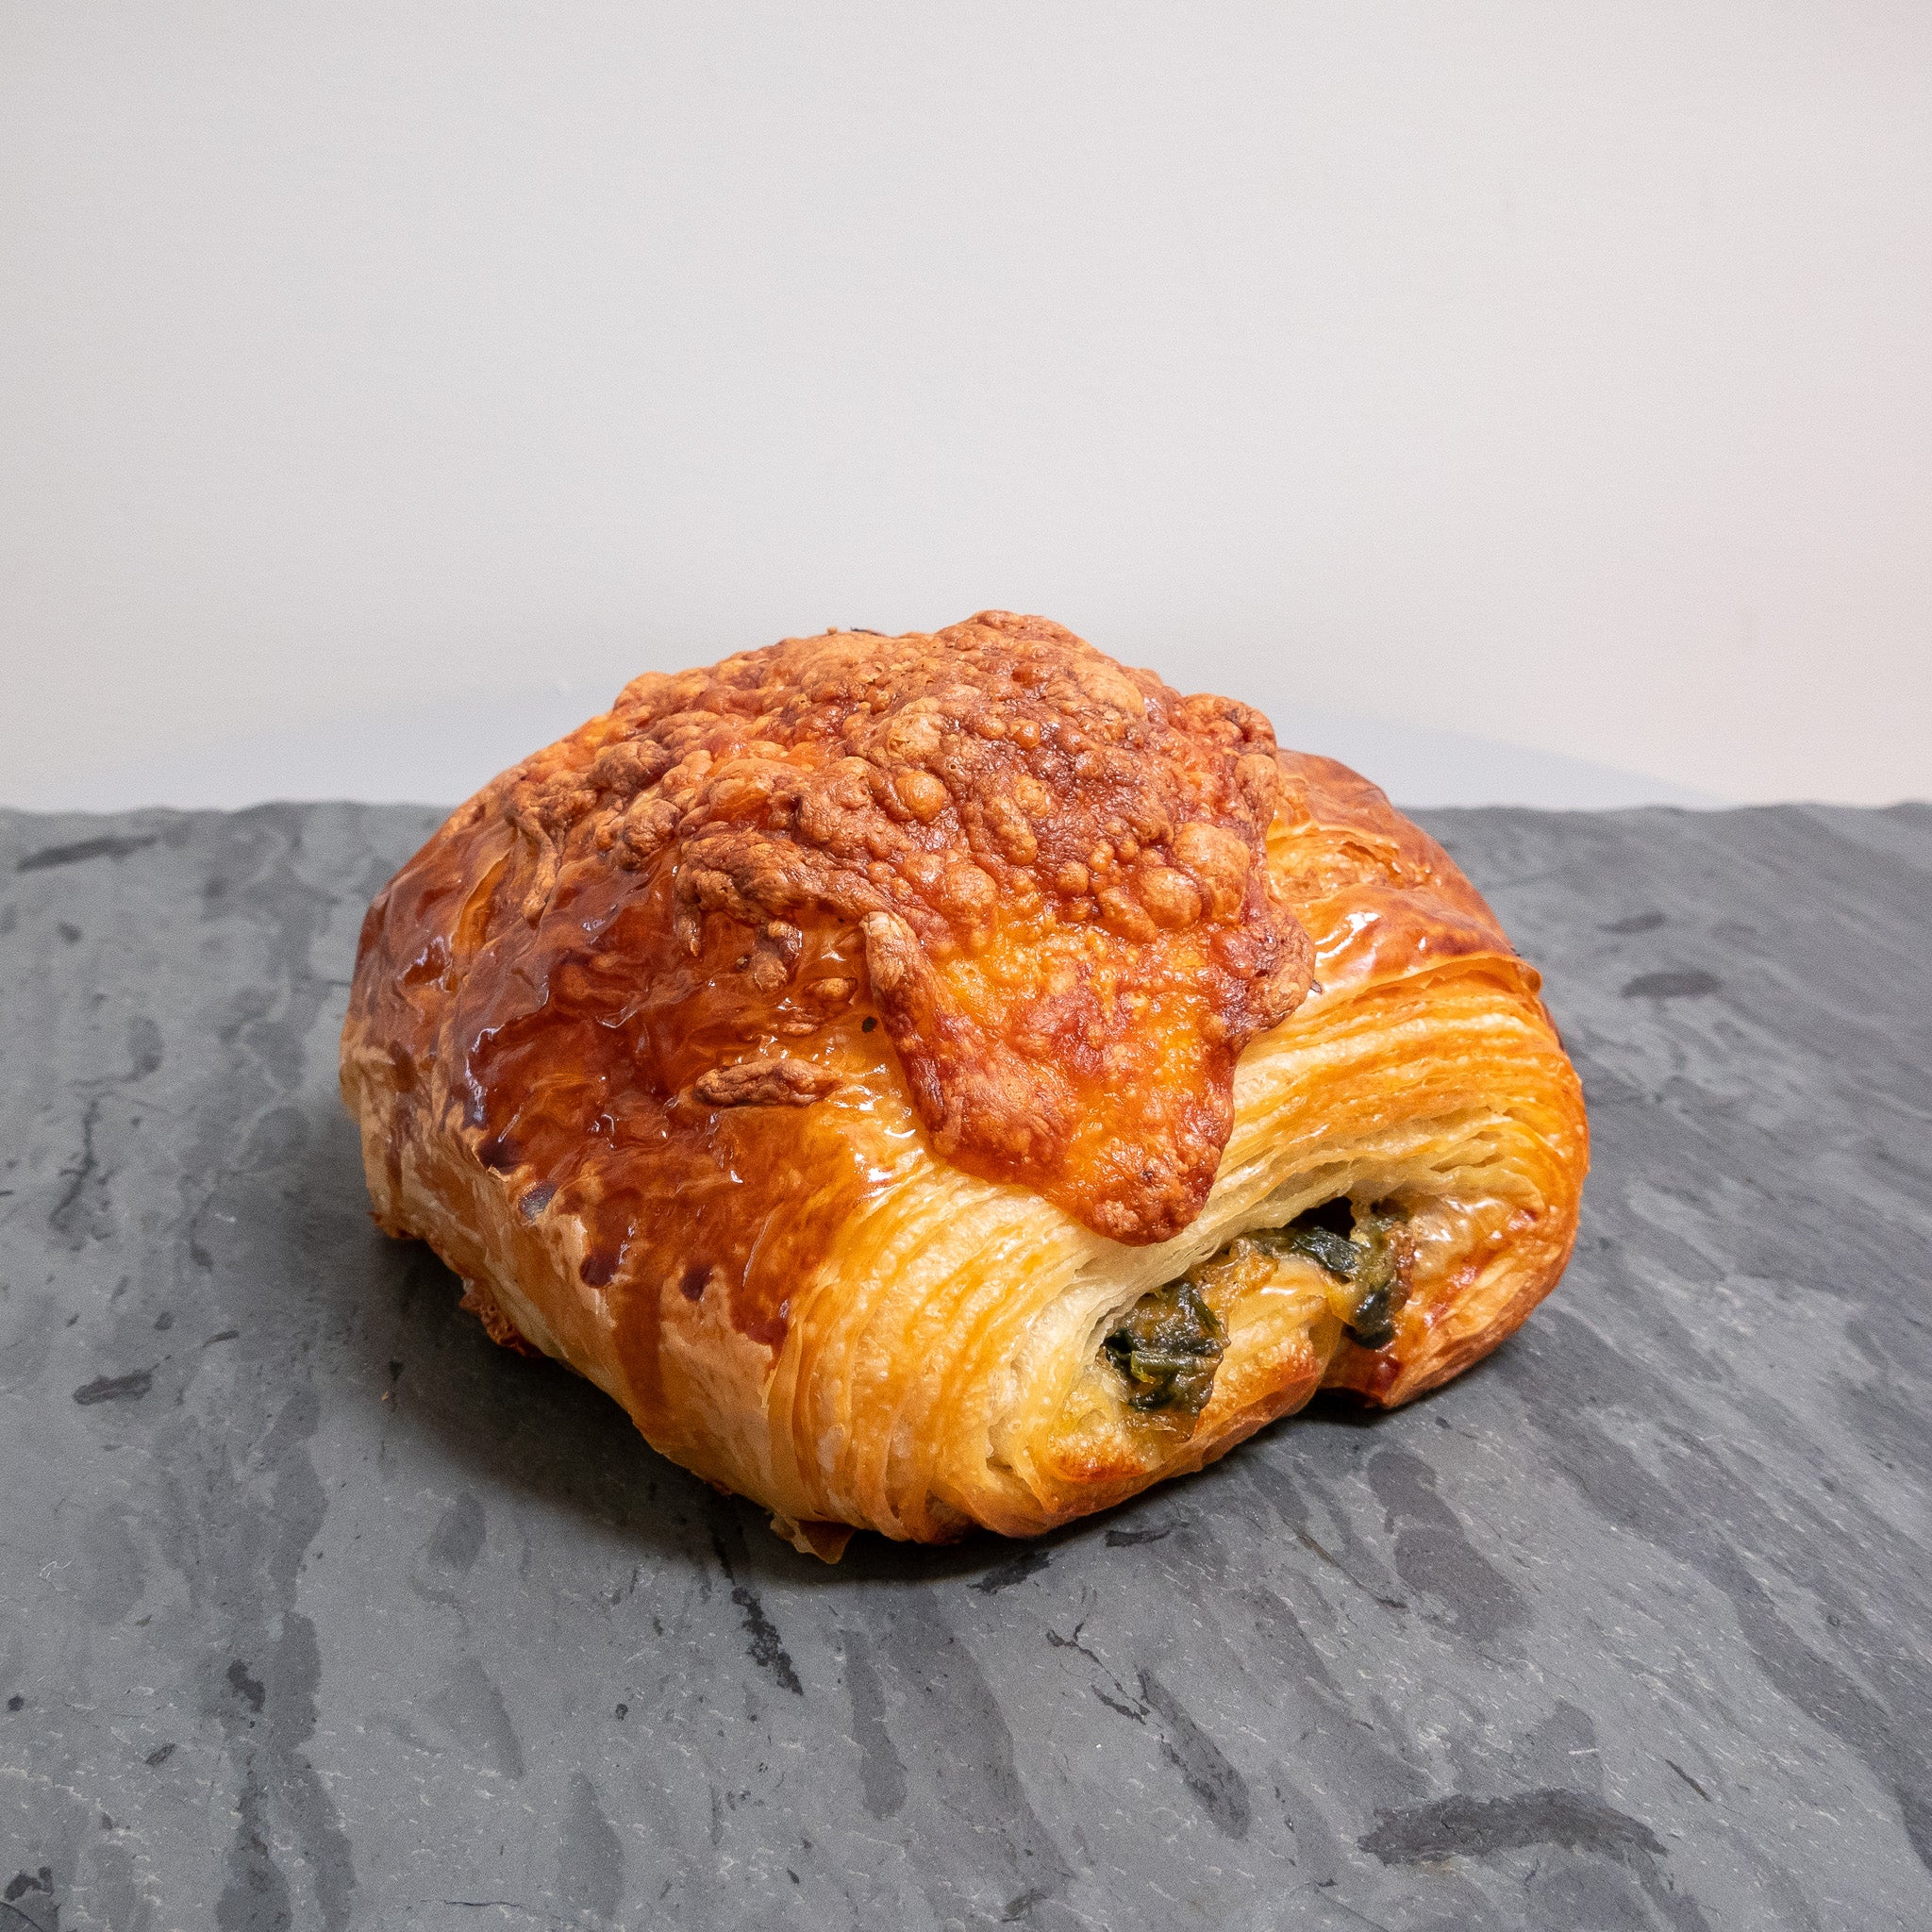 Spinach and cheese croissant